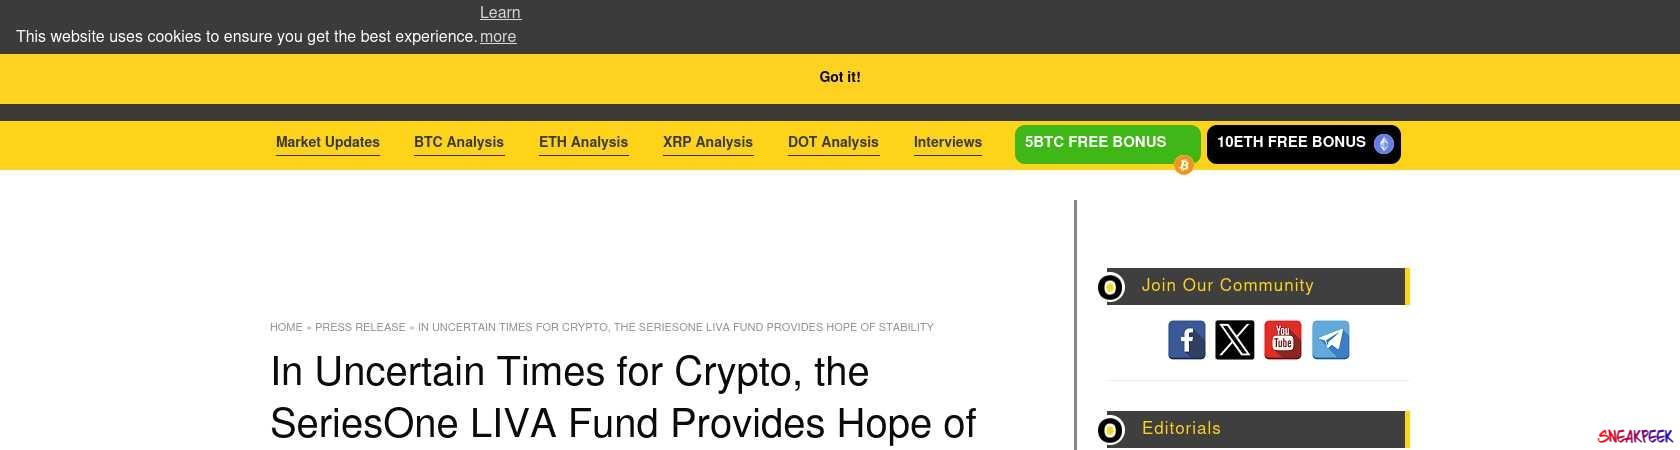 Read the full Article:  ⭲ In Uncertain Times for Crypto, the SeriesOne LIVA Fund Provides Hope of Stability